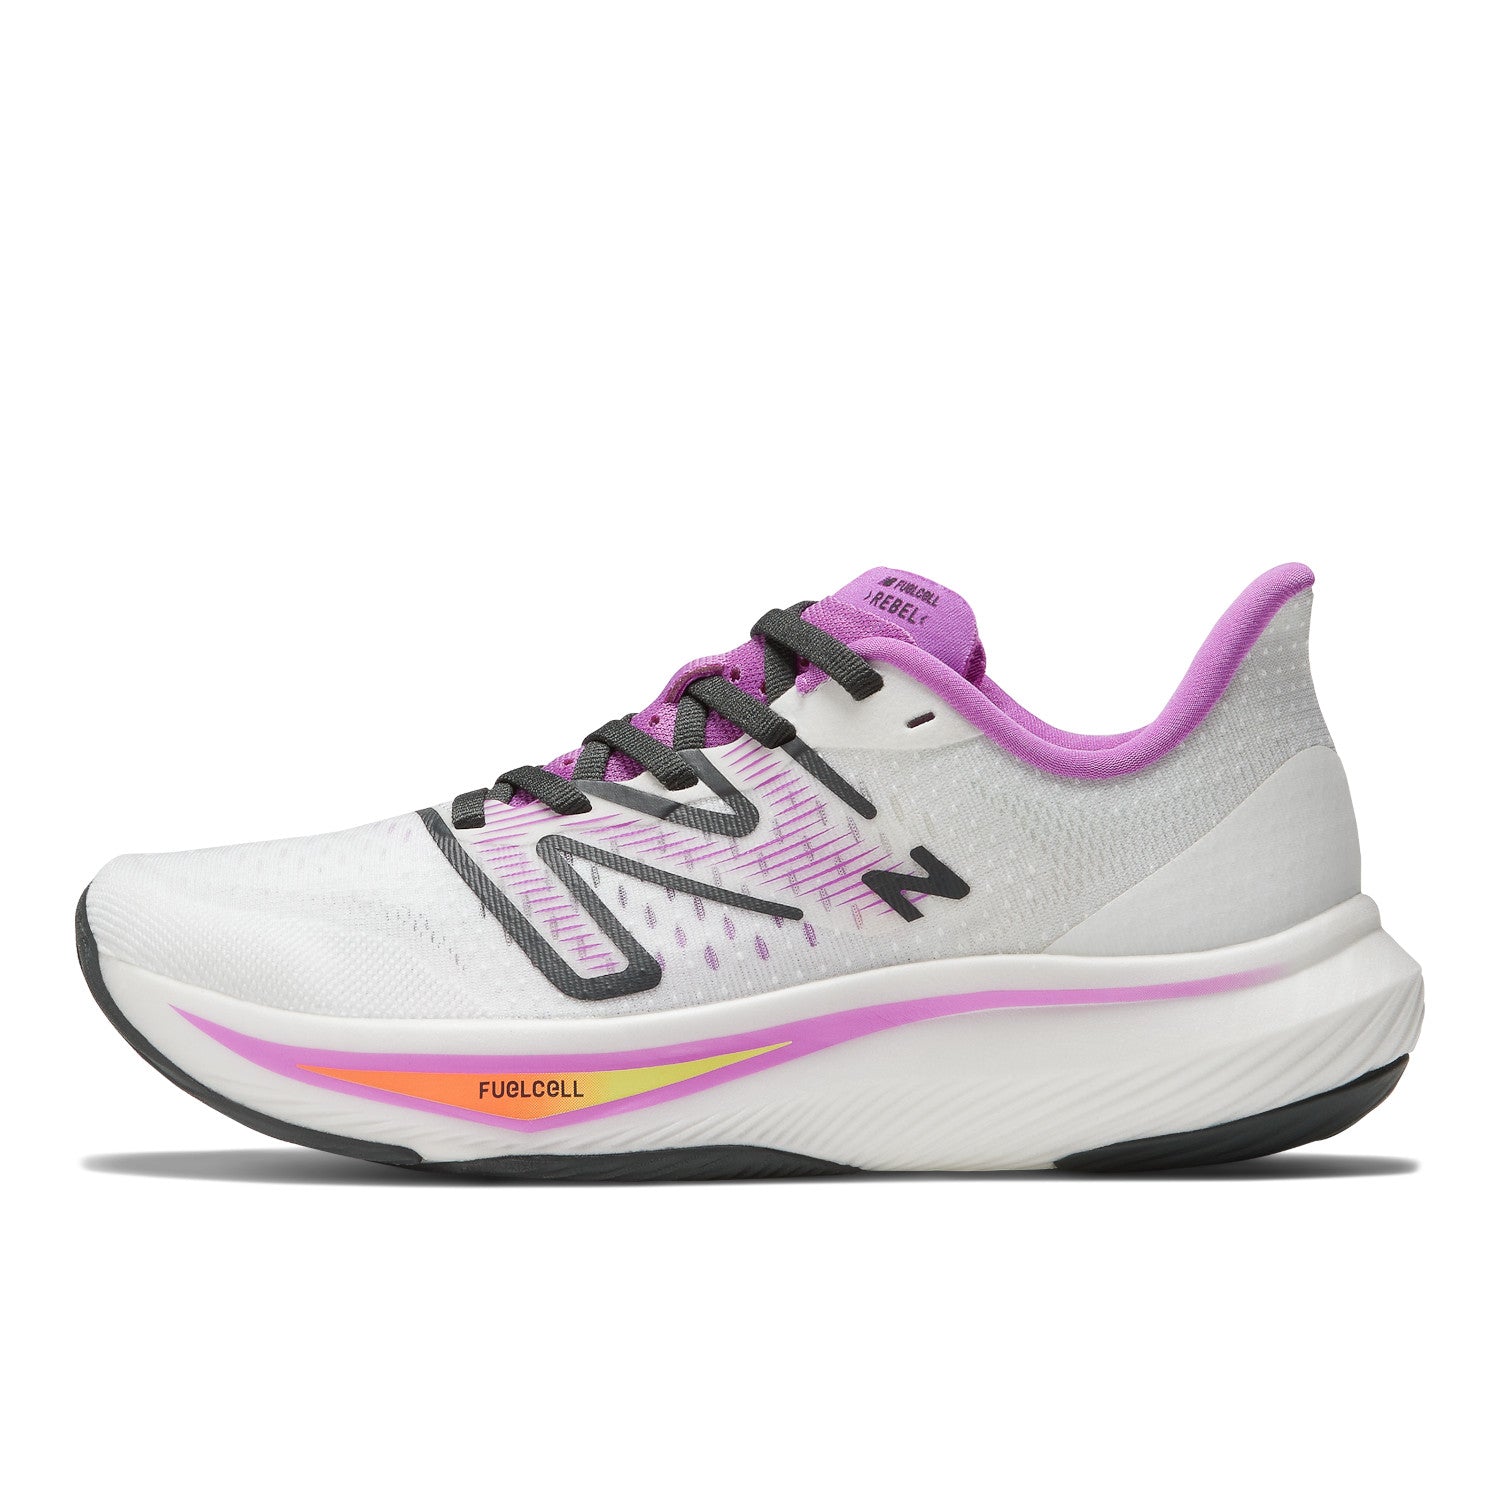 New Balance FuelCell Rebel v3 WFCXCW3 Women's7